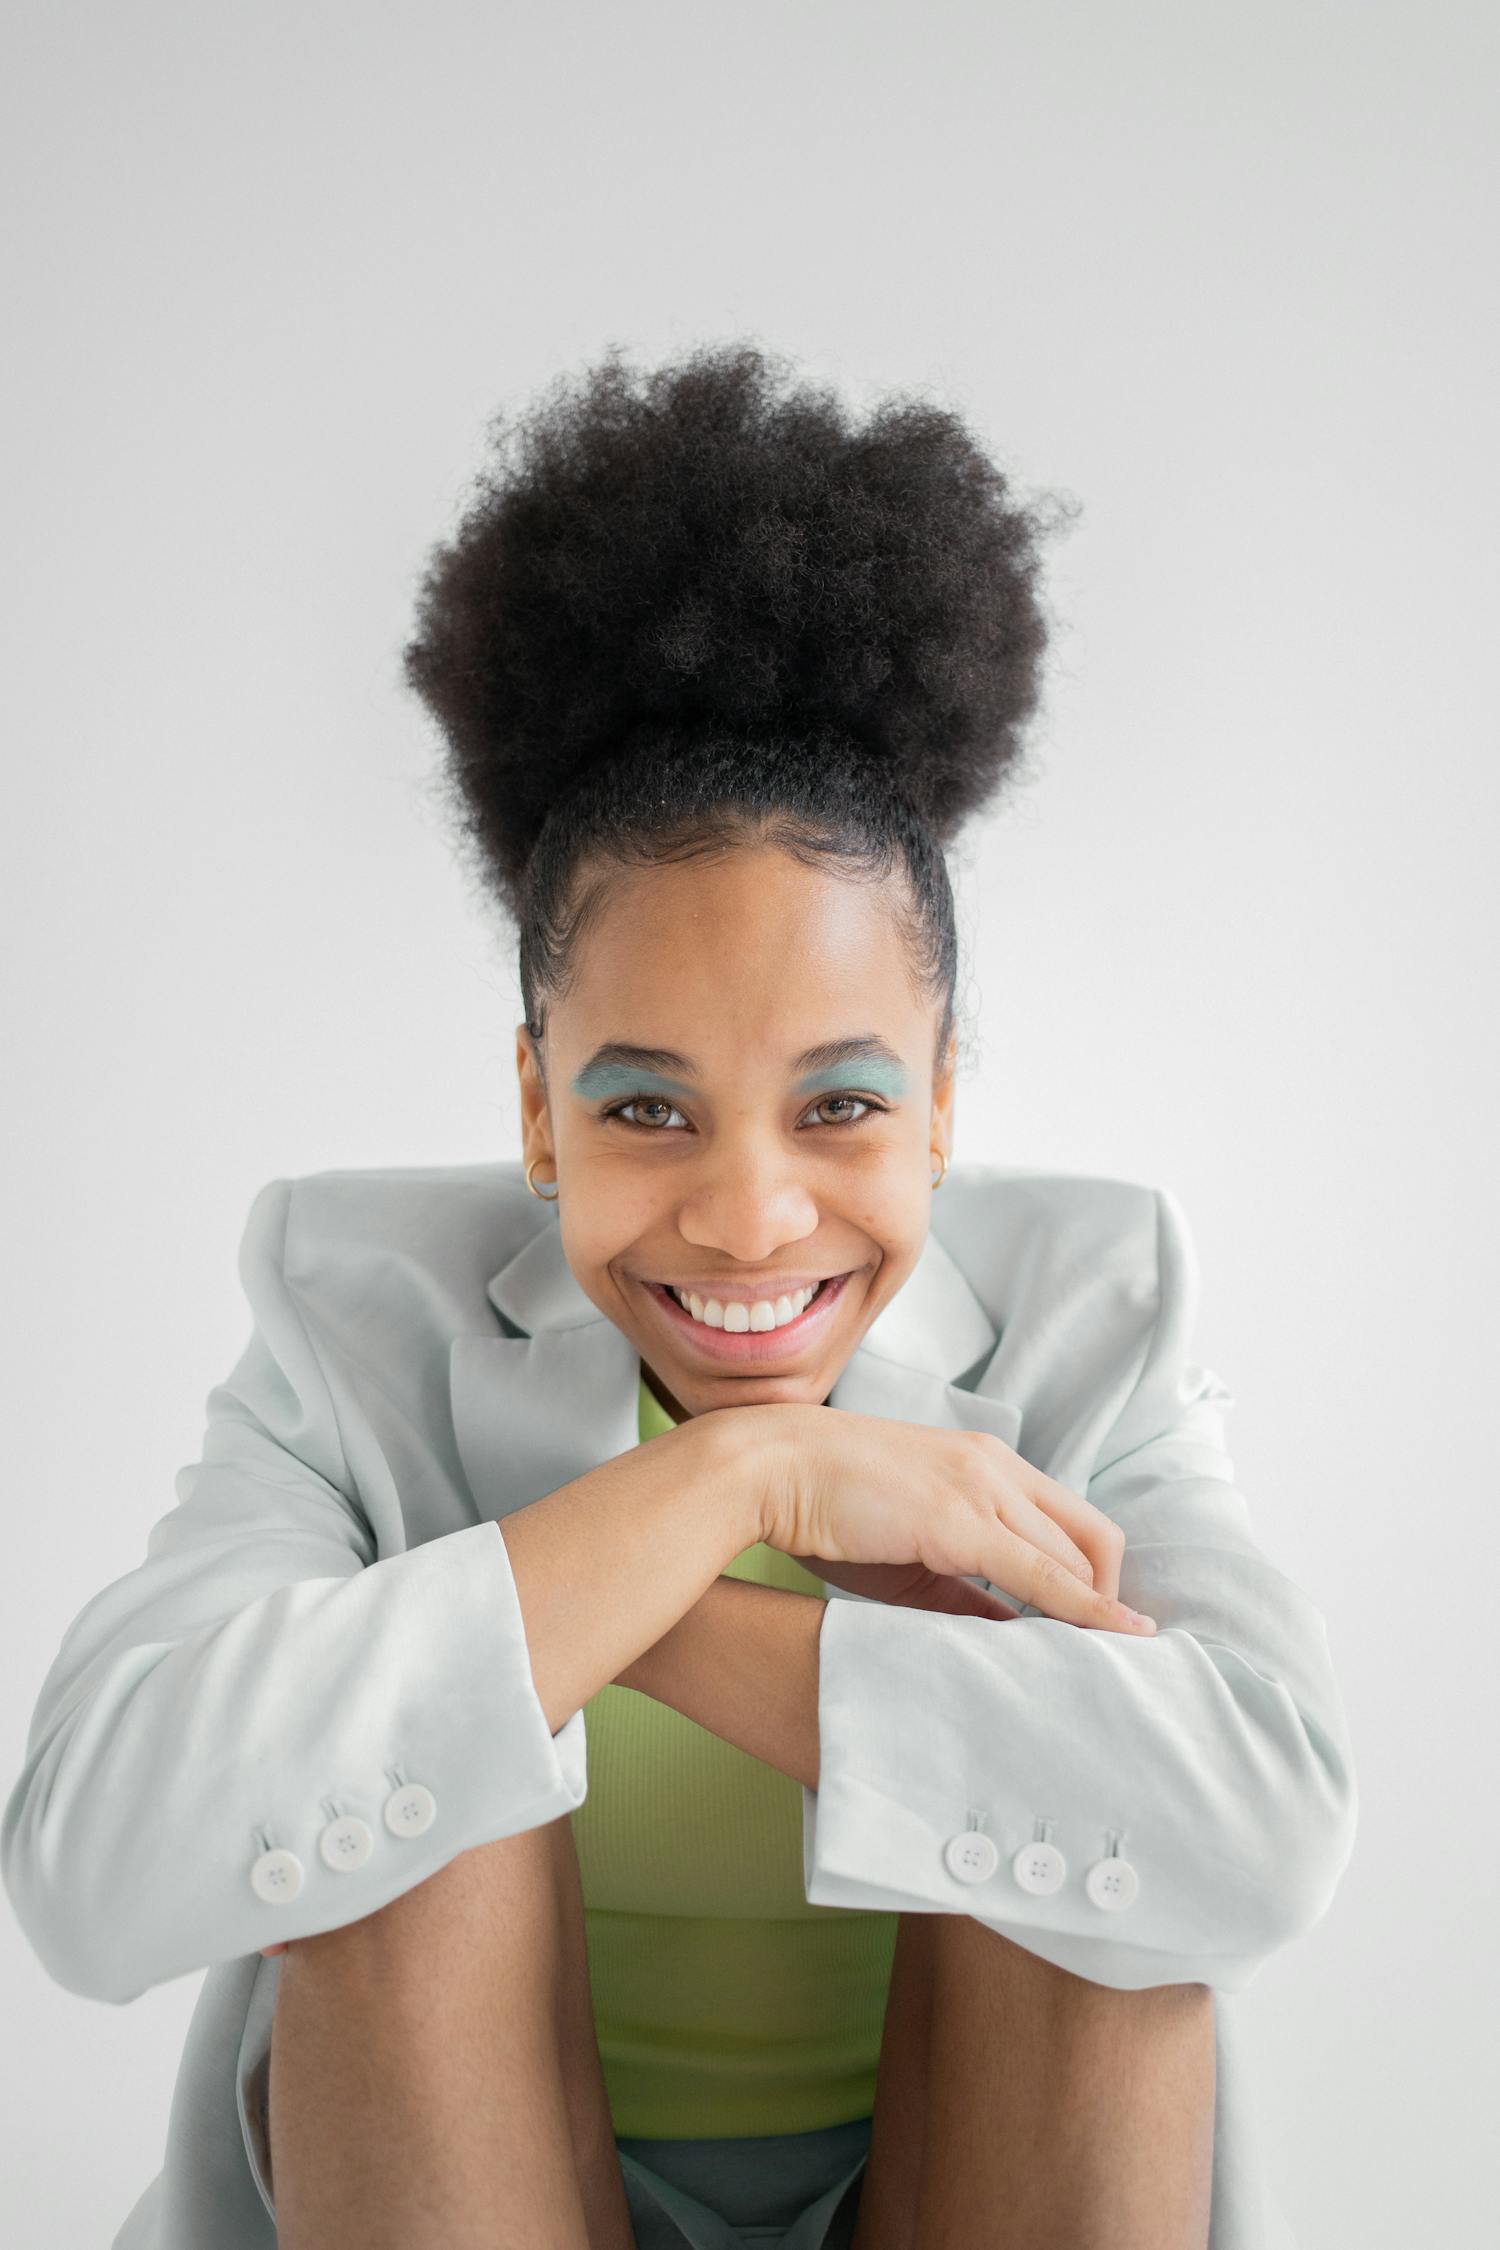 Smiling African American female model with curly hair and trendy visage sitting with bent legs and crossed arms